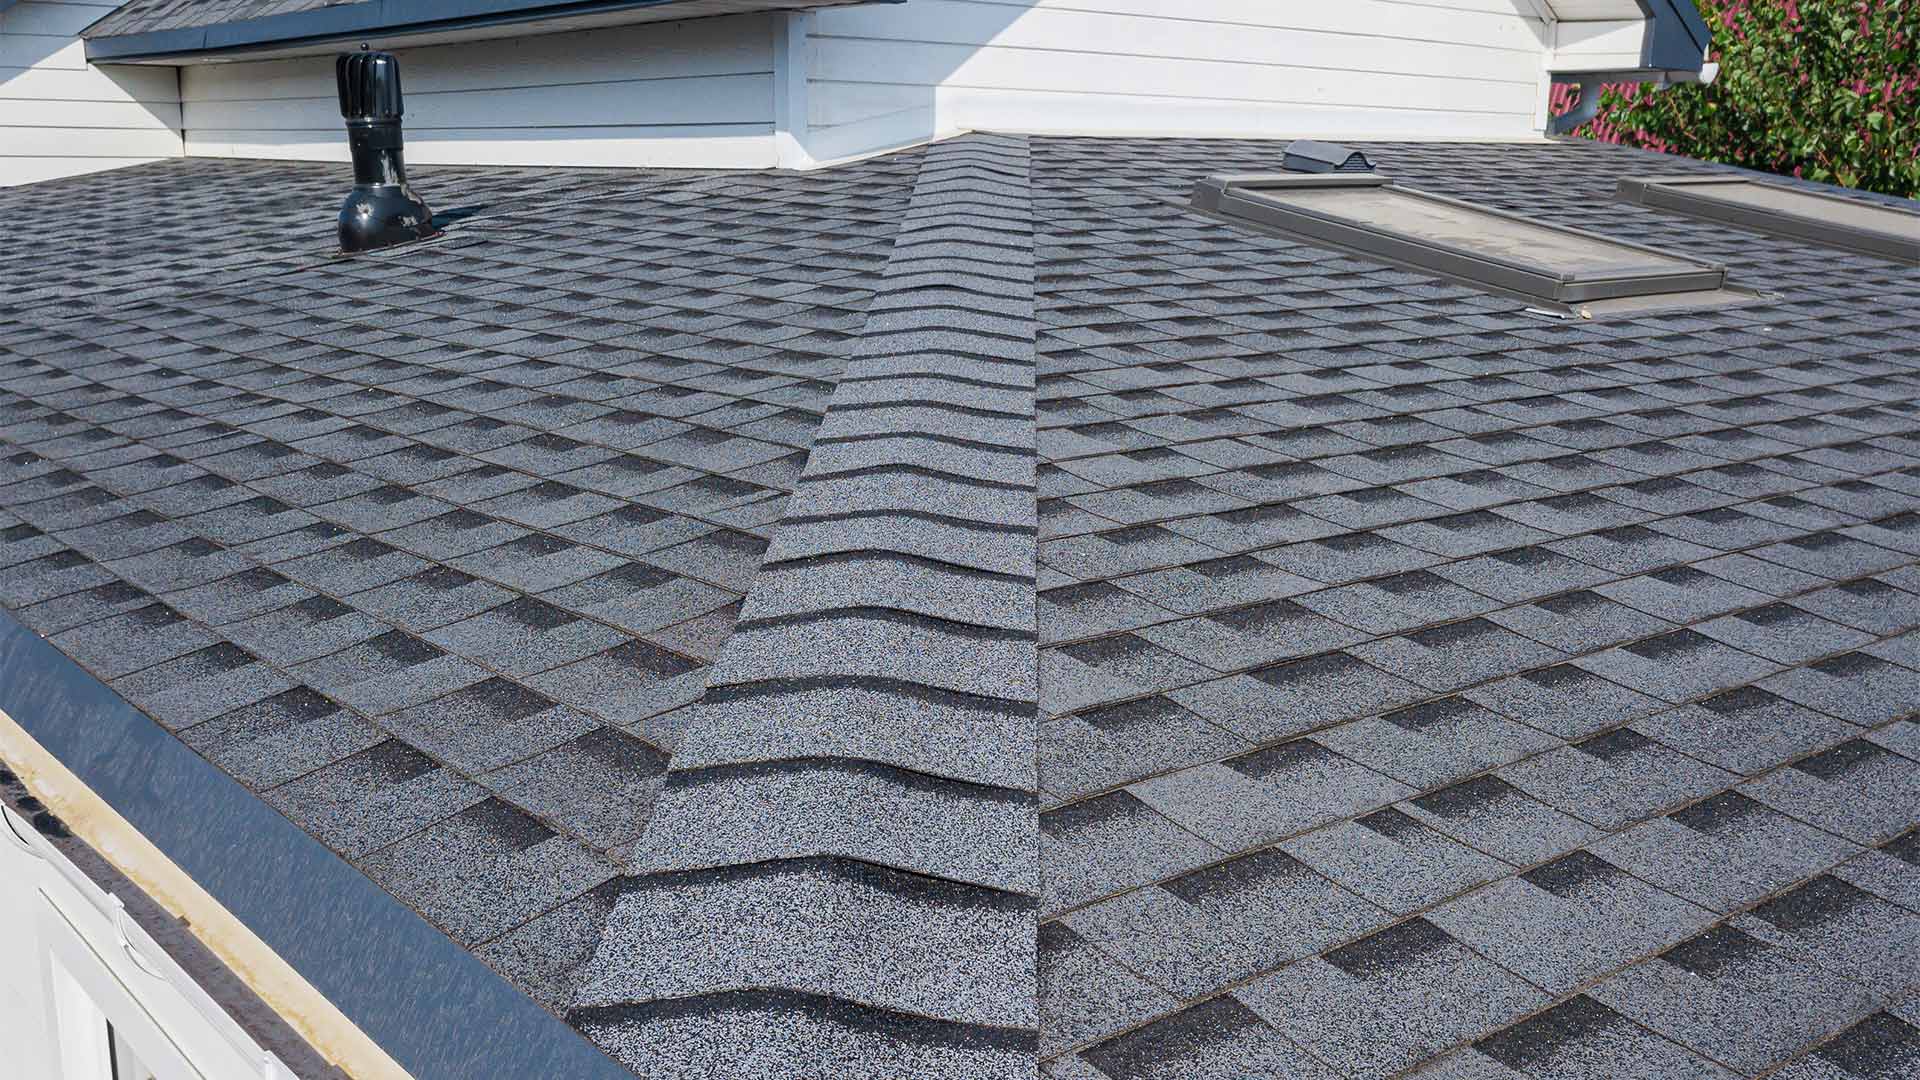 house roof close up with asphalt shingles installed cranston ri